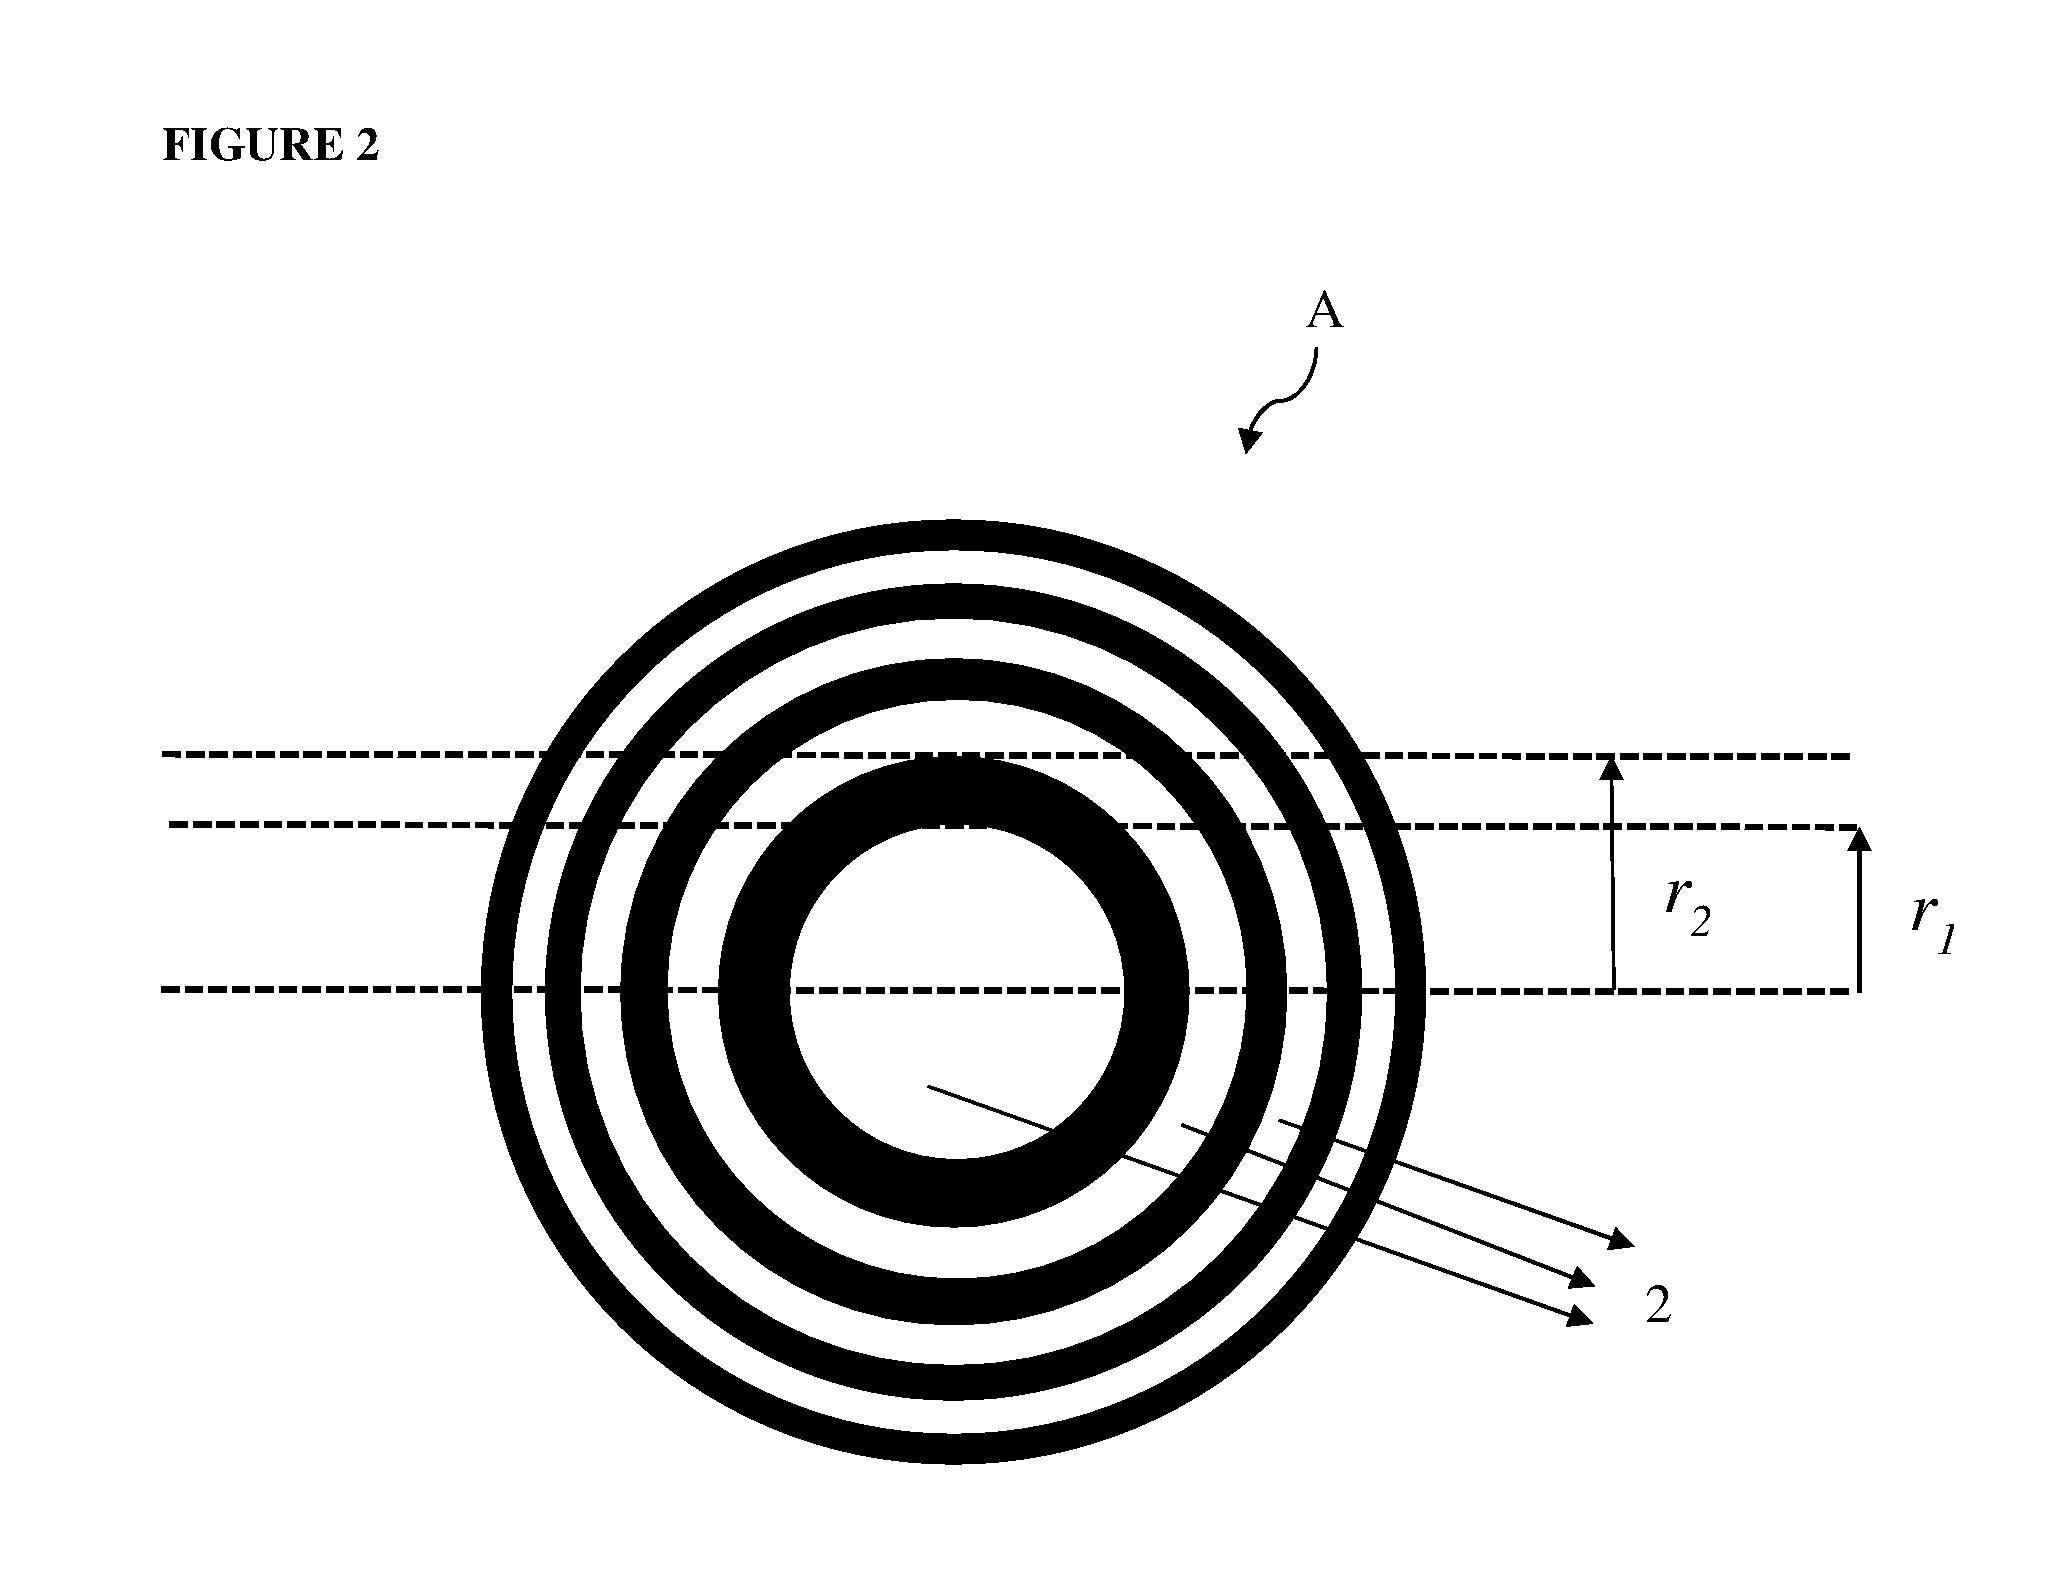 System for increasing the number of focal points in artificial eye lenses